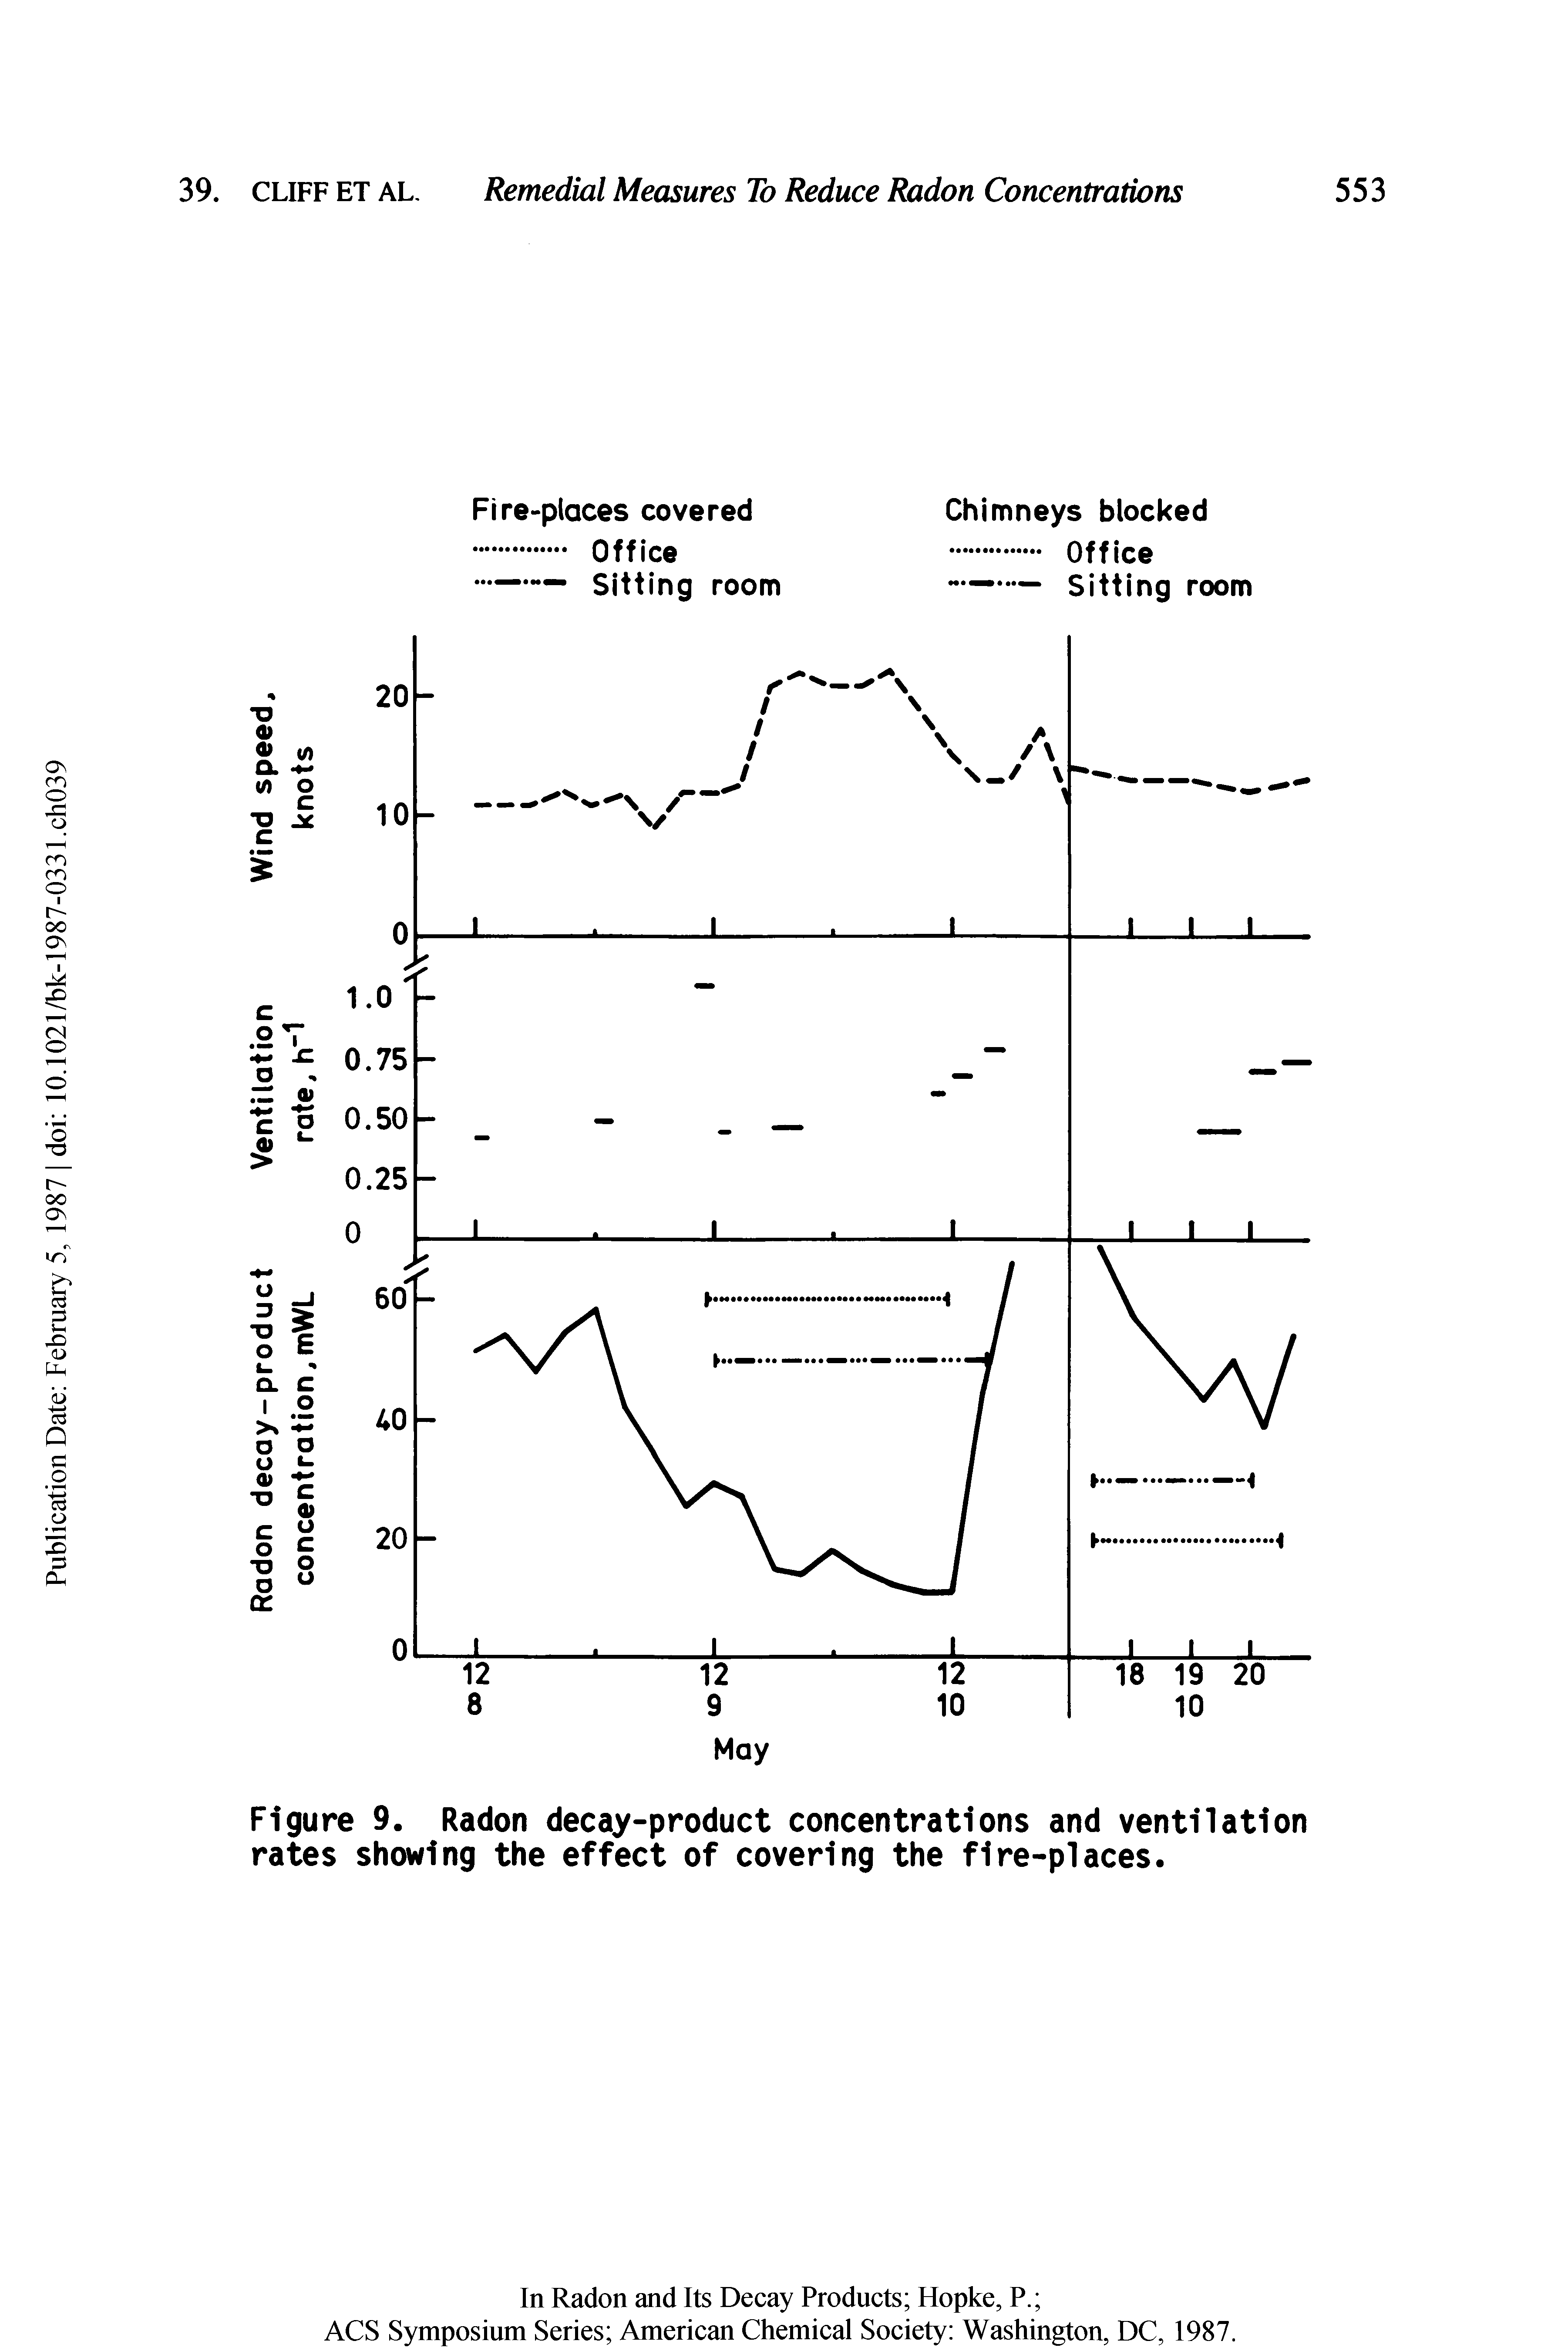 Figure 9. Radon decay-product concentrations and ventilation rates showing the effect of covering the fire-places.